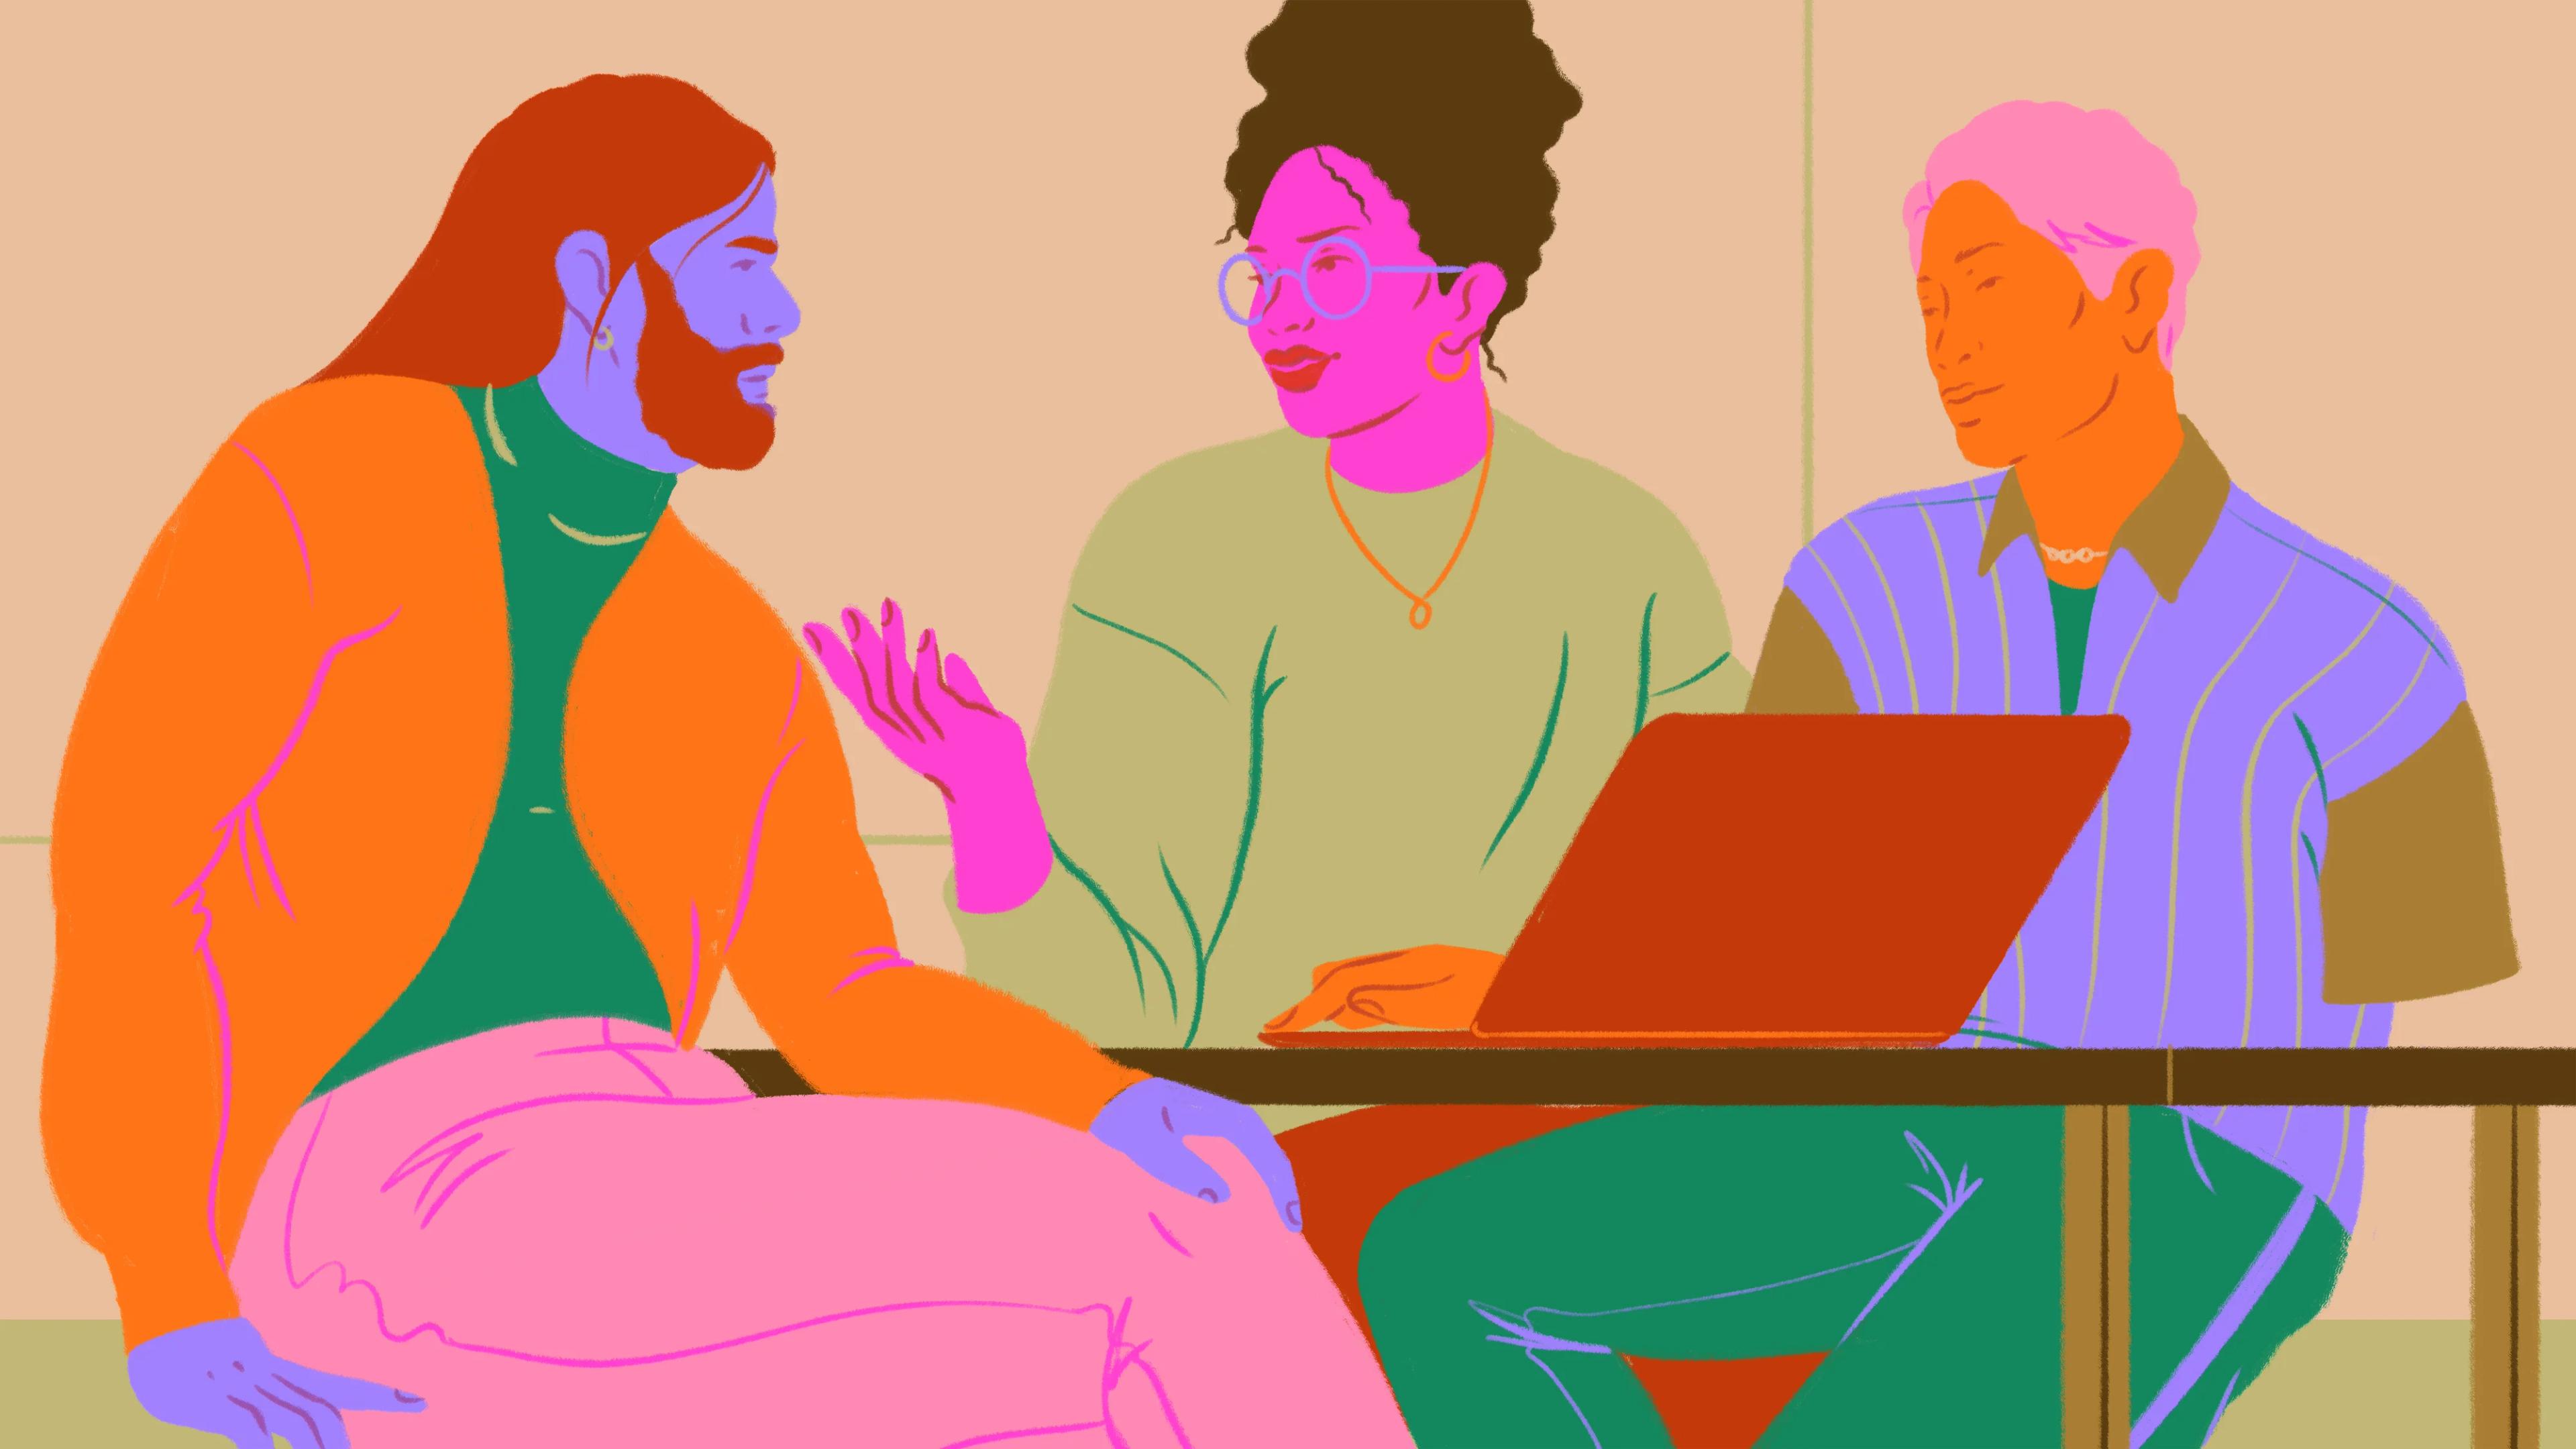 Illustration of 3 Googlers sitting at a table and talking